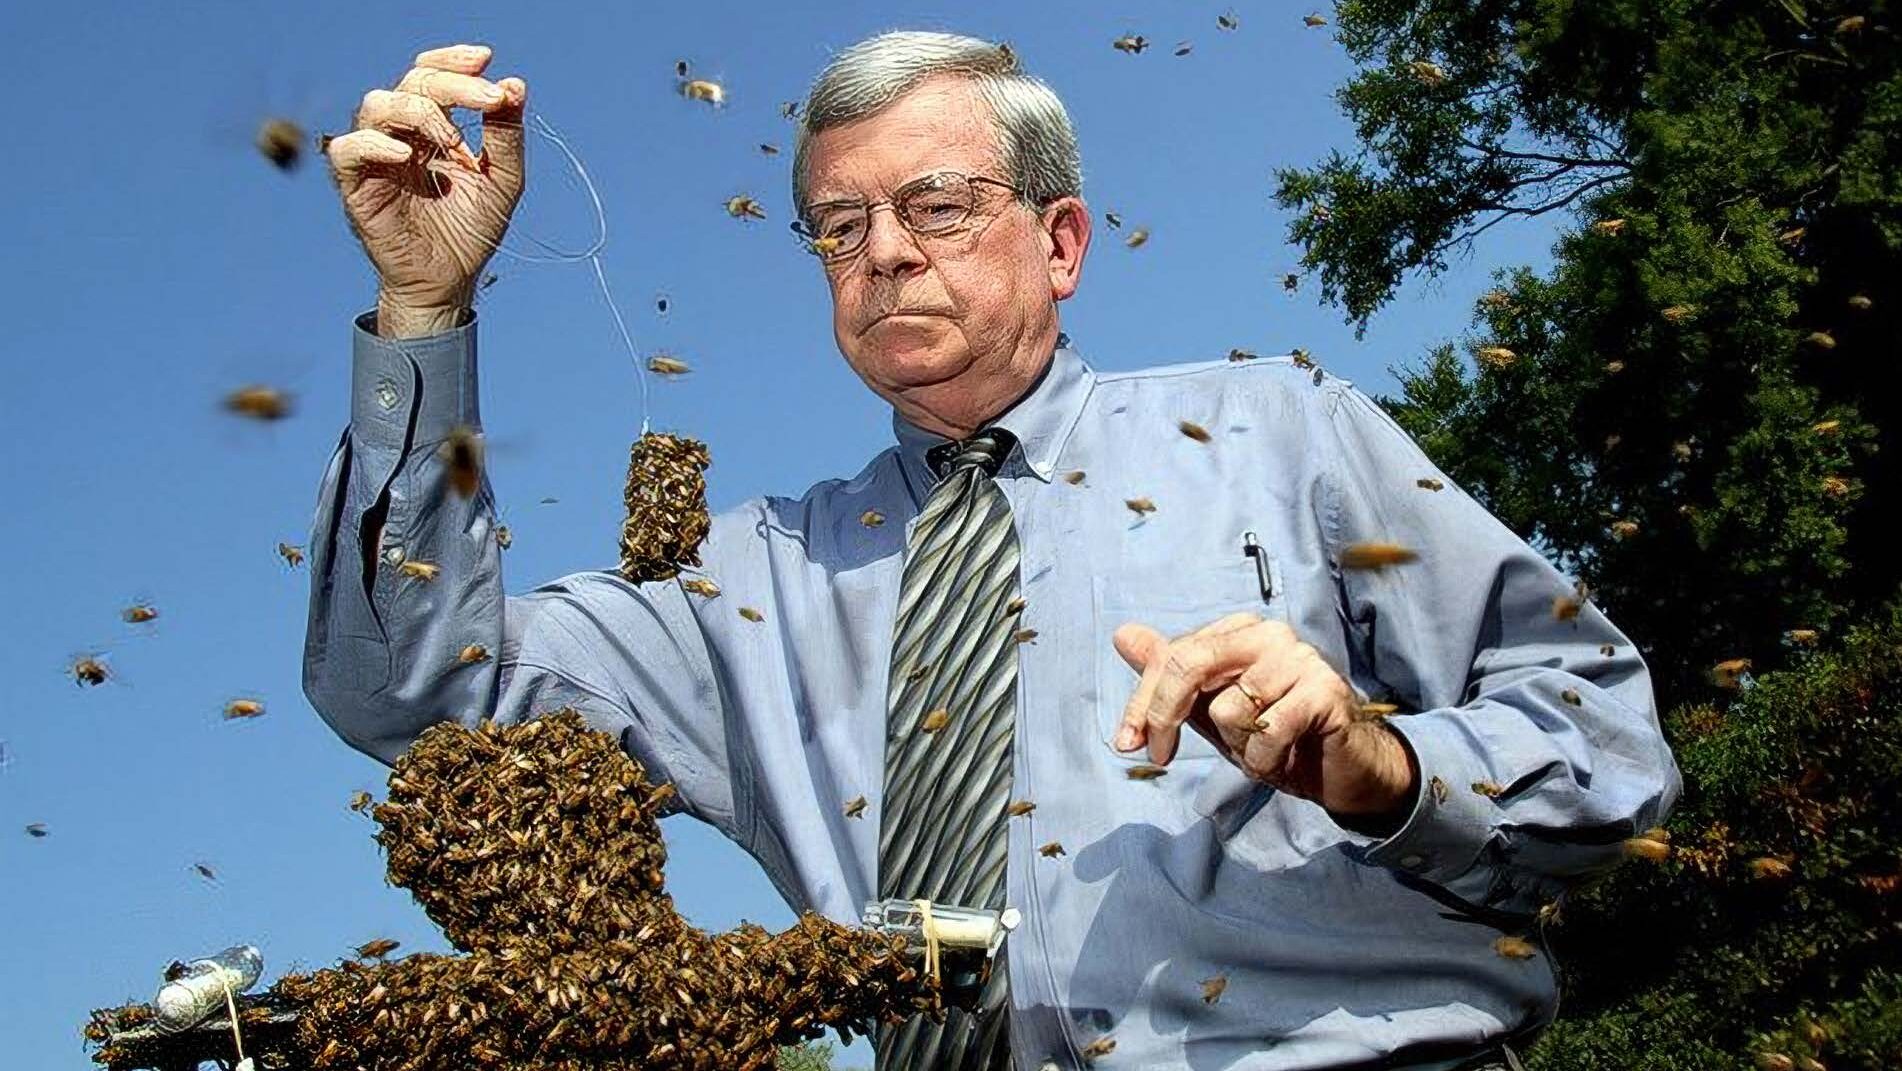 John Ambrose stands outside holding a mass of bees